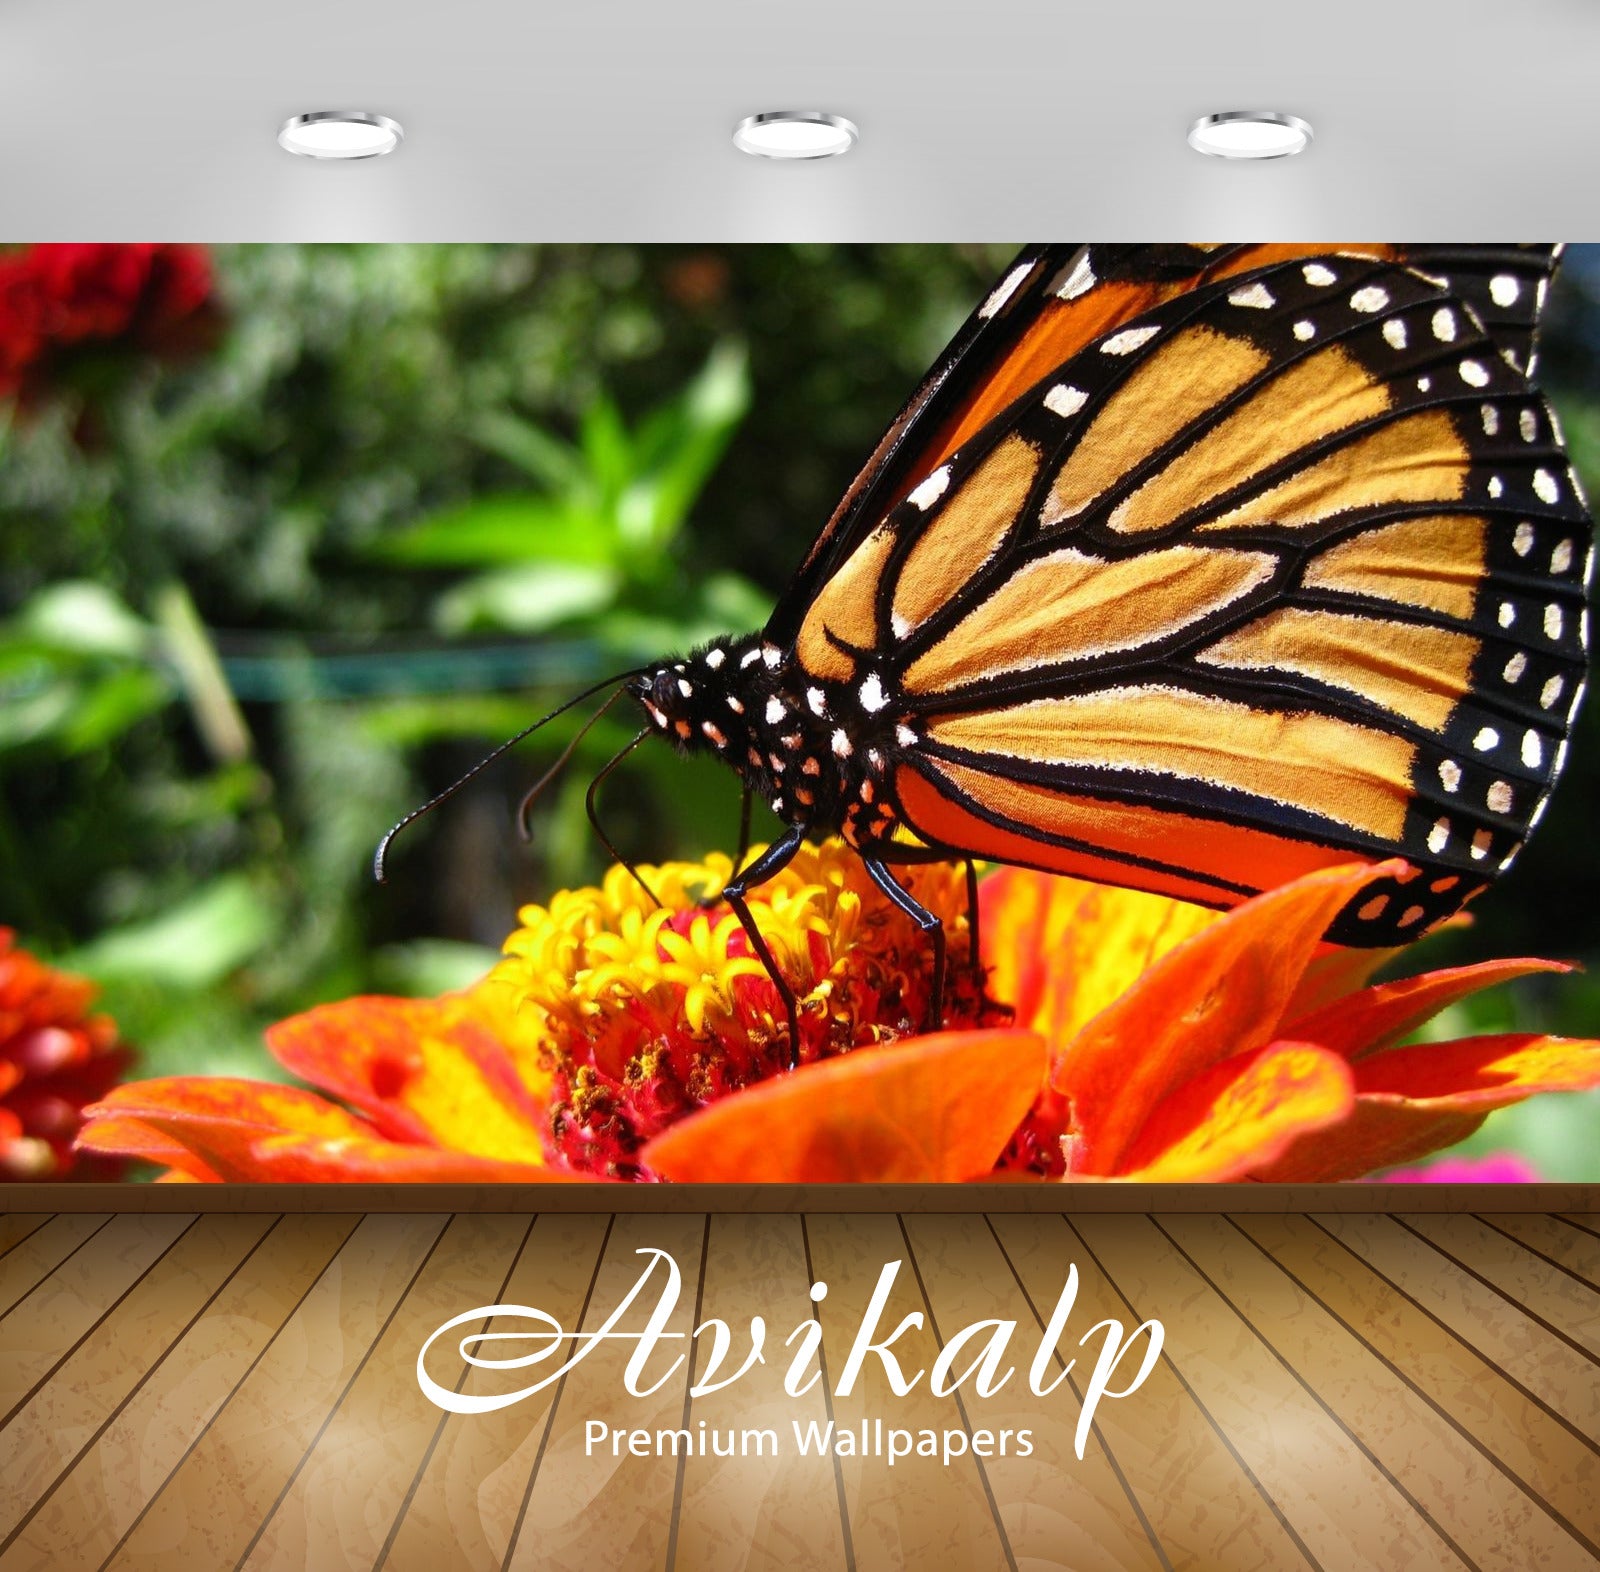 Avikalp Exclusive Awi2513 Colorful Butterfly On Orange Flower Full HD Wallpapers for Living room, Ha